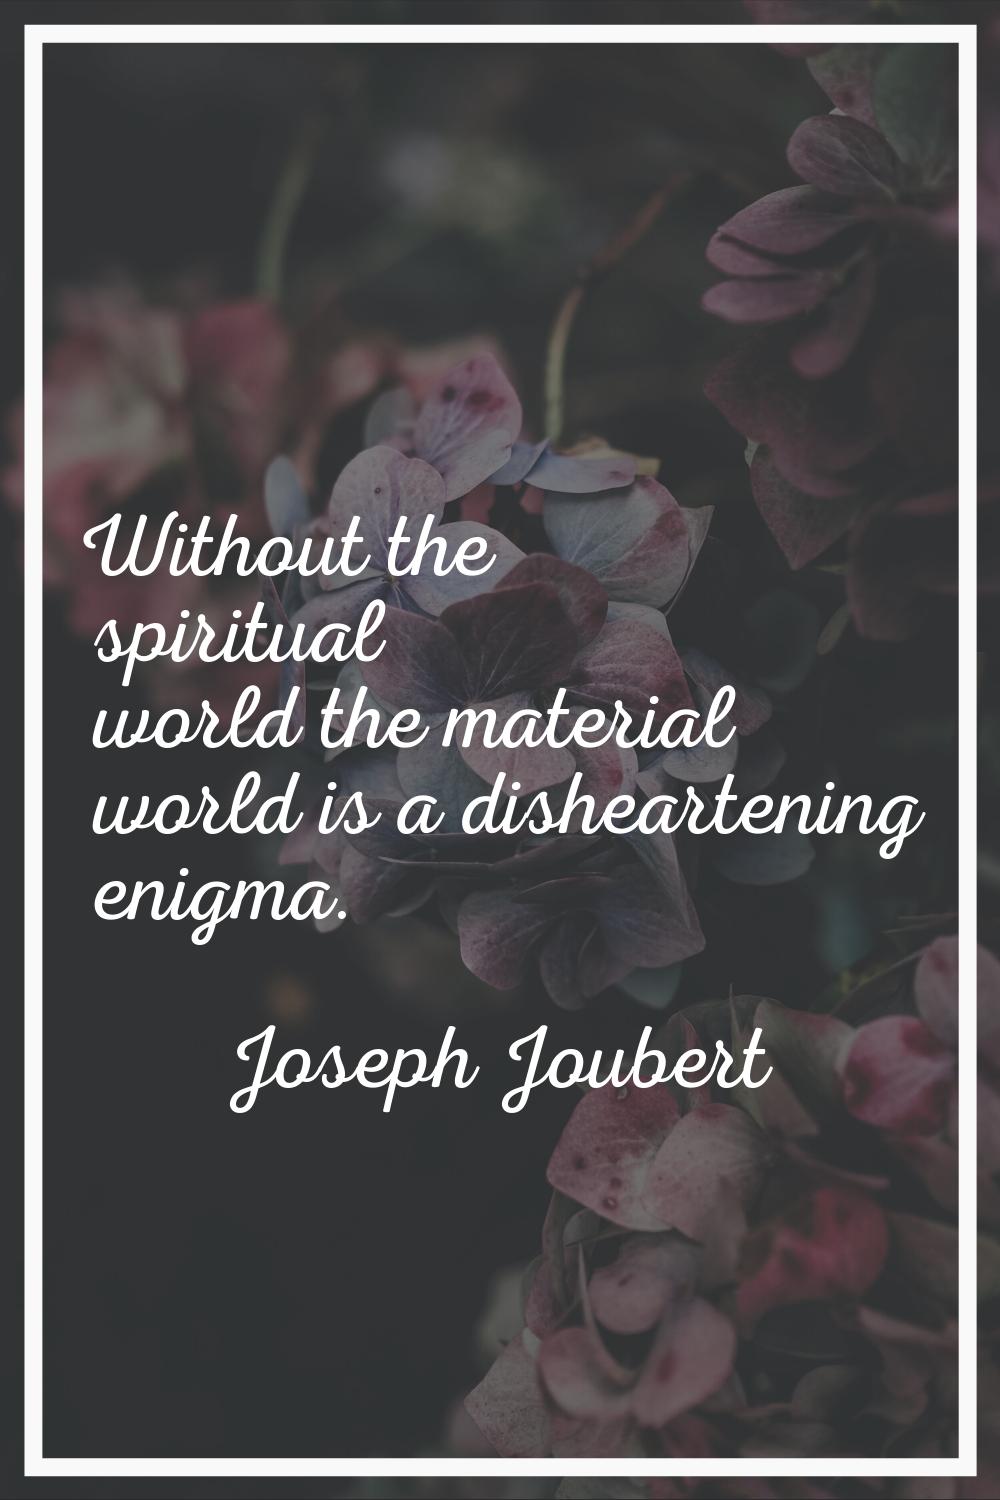 Without the spiritual world the material world is a disheartening enigma.